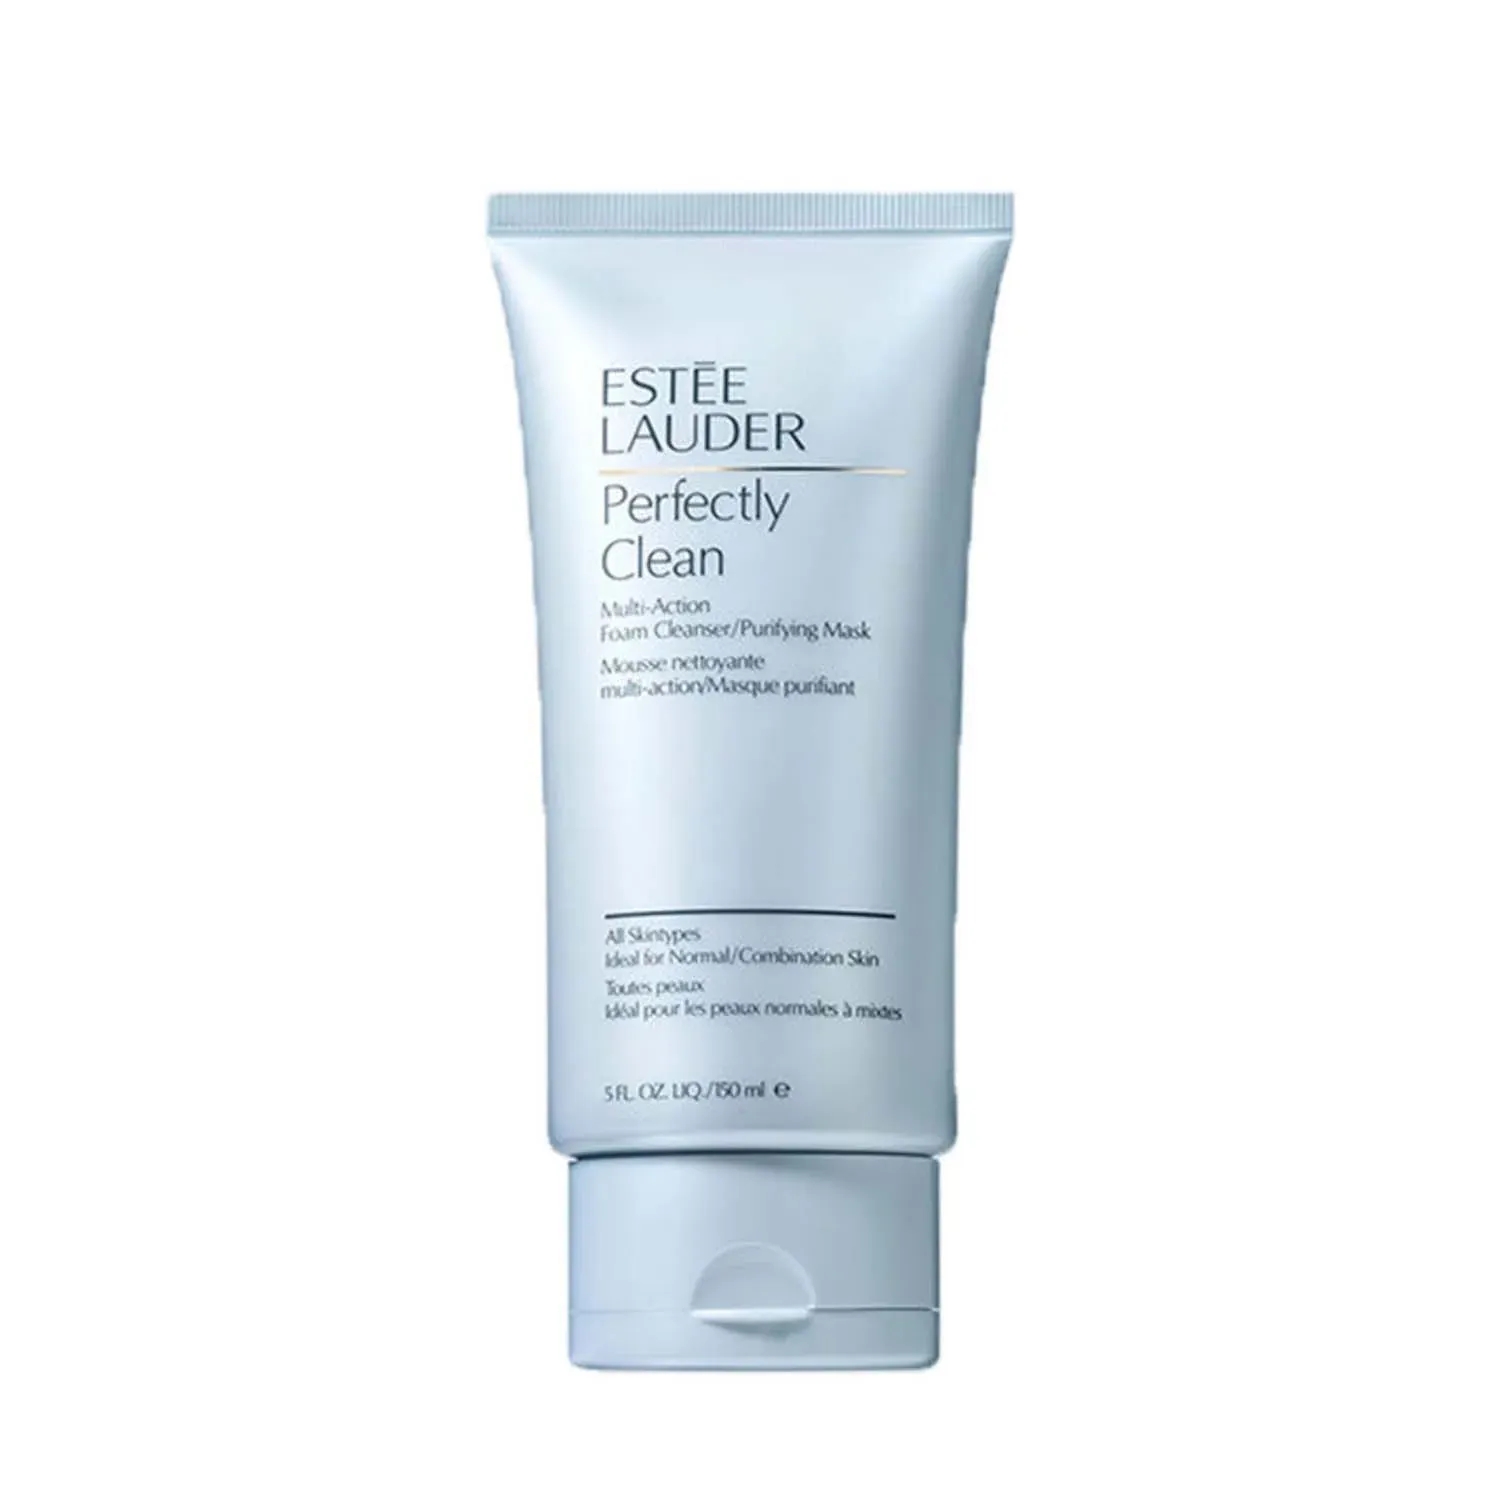 Estee Lauder | Estee Lauder Perfectly Clean Multi Action Foam Cleanser + Purifying Mask - (150ml)